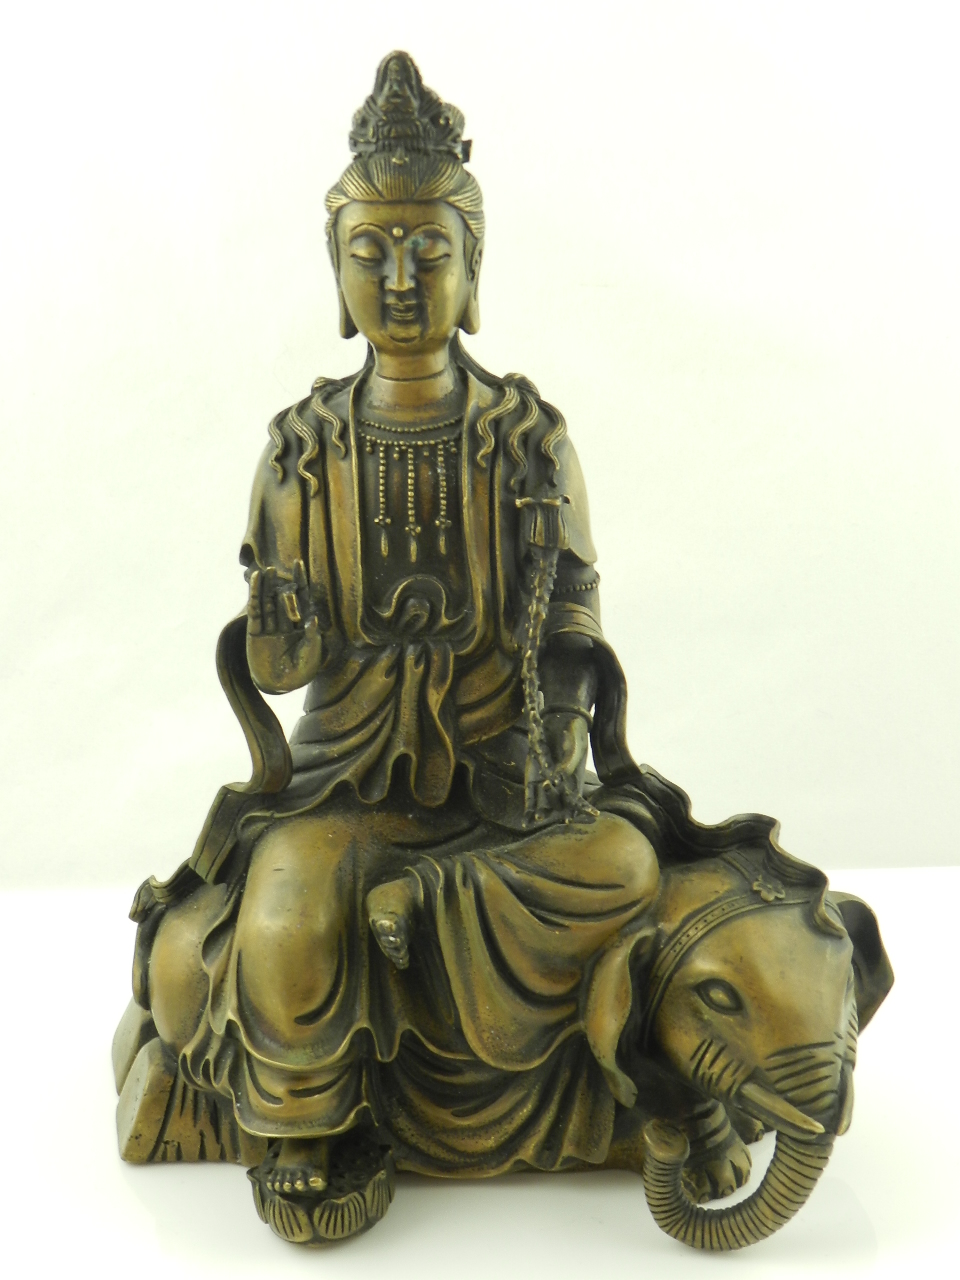 A Chinese bronze model of Guan Yin seated on the back of an elephant.